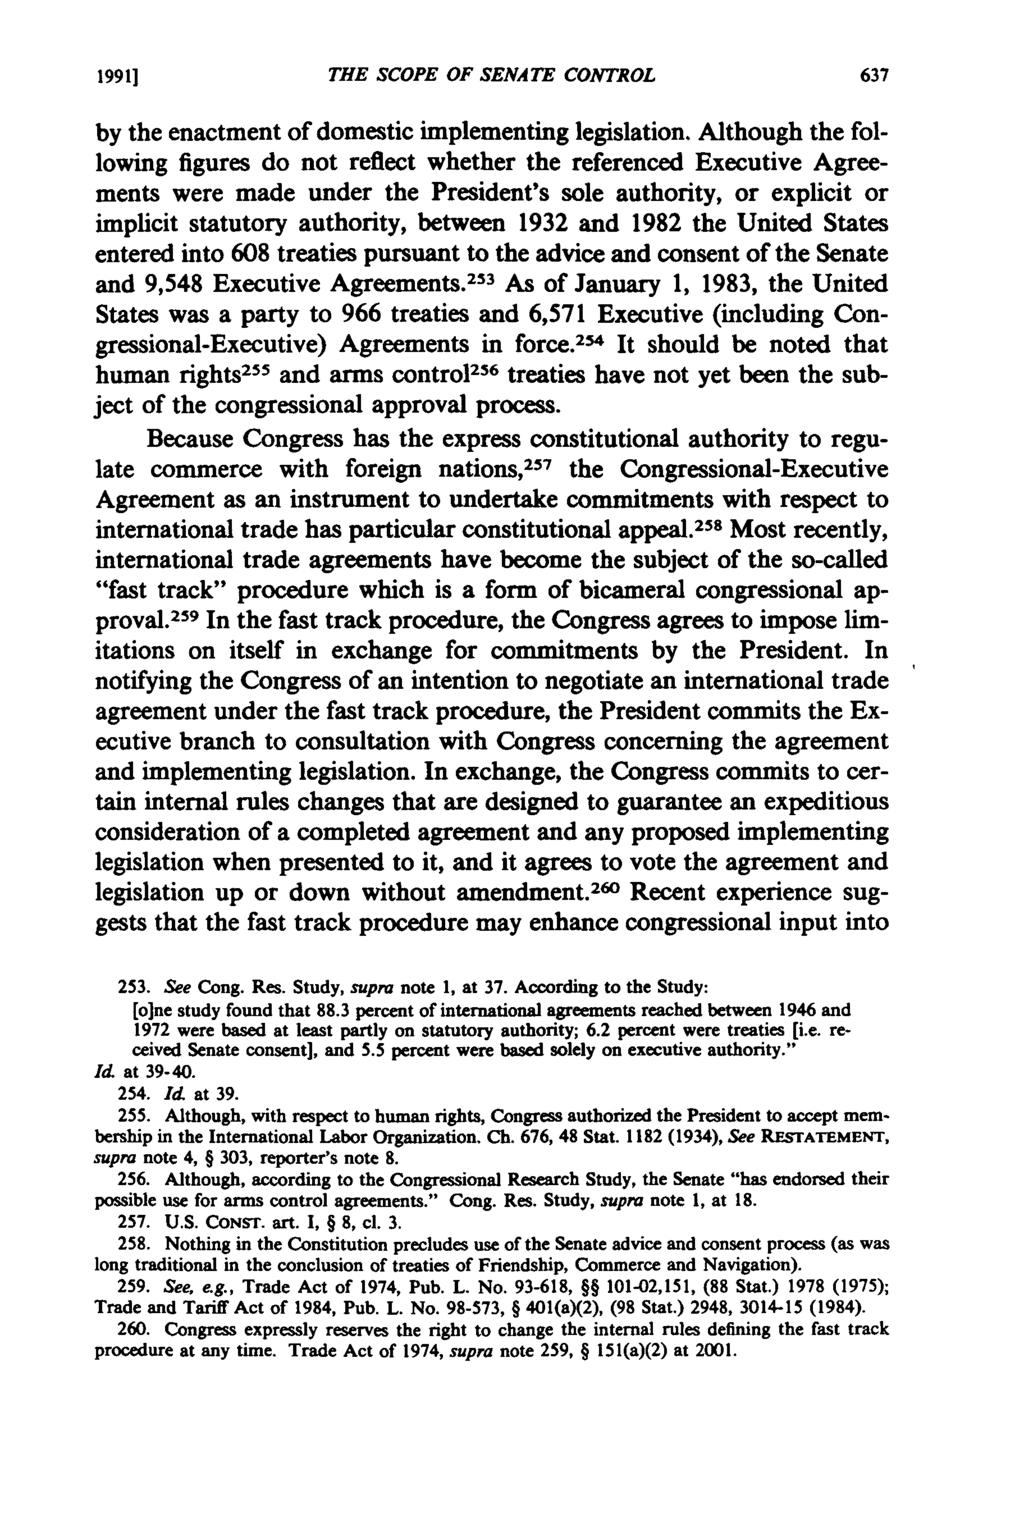 19911 THE SCOPE OF SENATE CONTROL by the enactment of domestic implementing legislation.